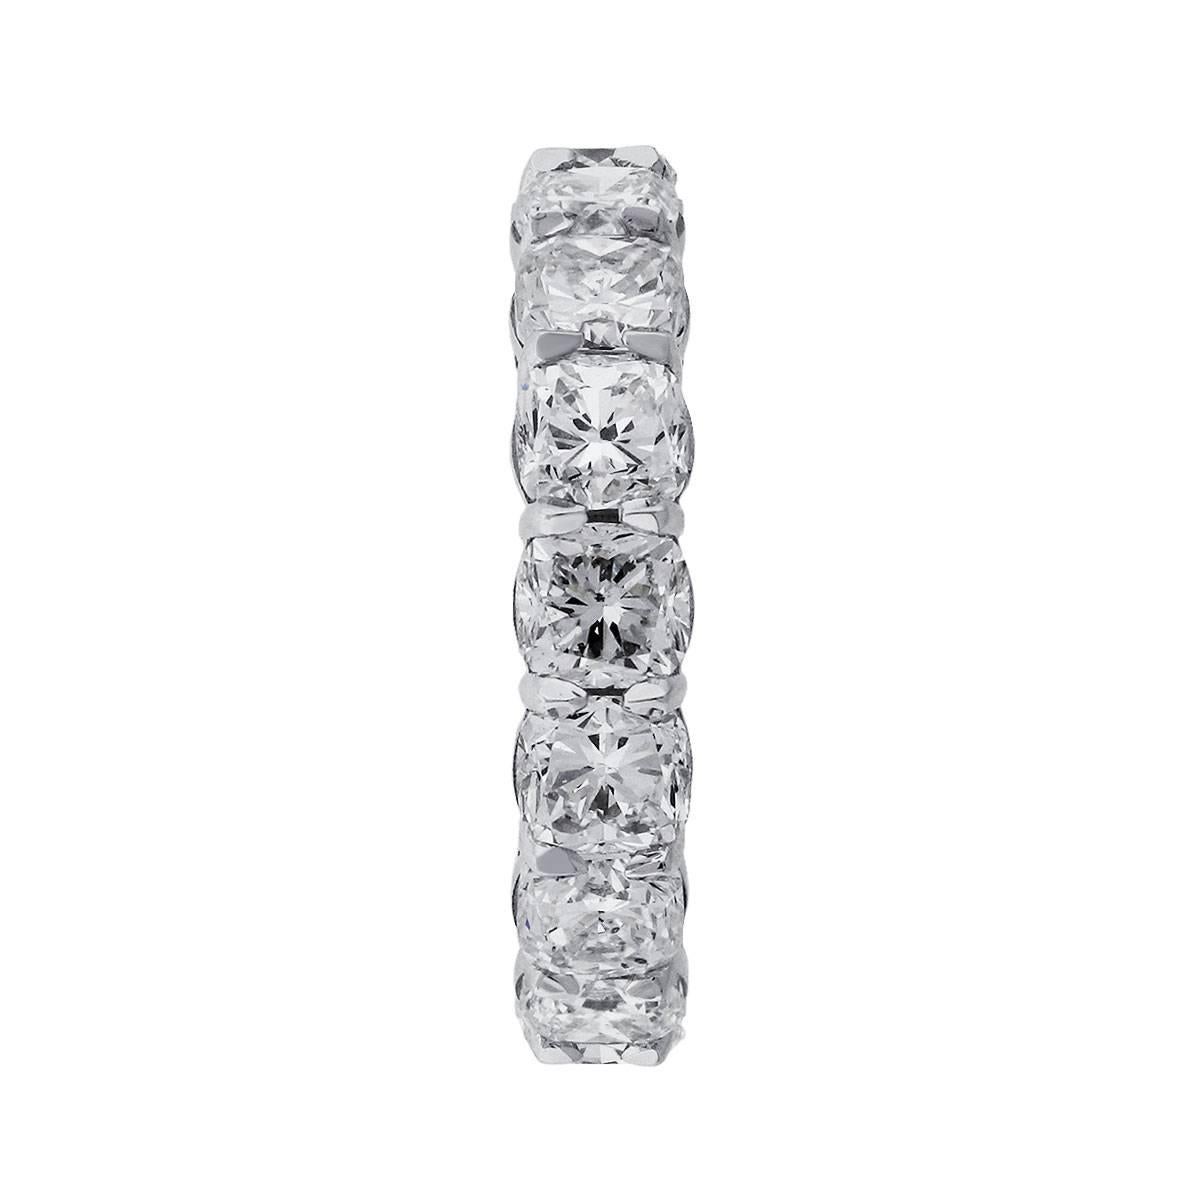 Material: 18k white gold
Diamond Details: Approximately 6.71ctw of cushion diamonds. Diamonds are G/H in color and VS in clarity
Ring Size: 6.5
Ring Measurements: 0.90″ x 0.15″ x 0.90″
Total Weight: 4g (2.6dwt)
SKU: A30311576